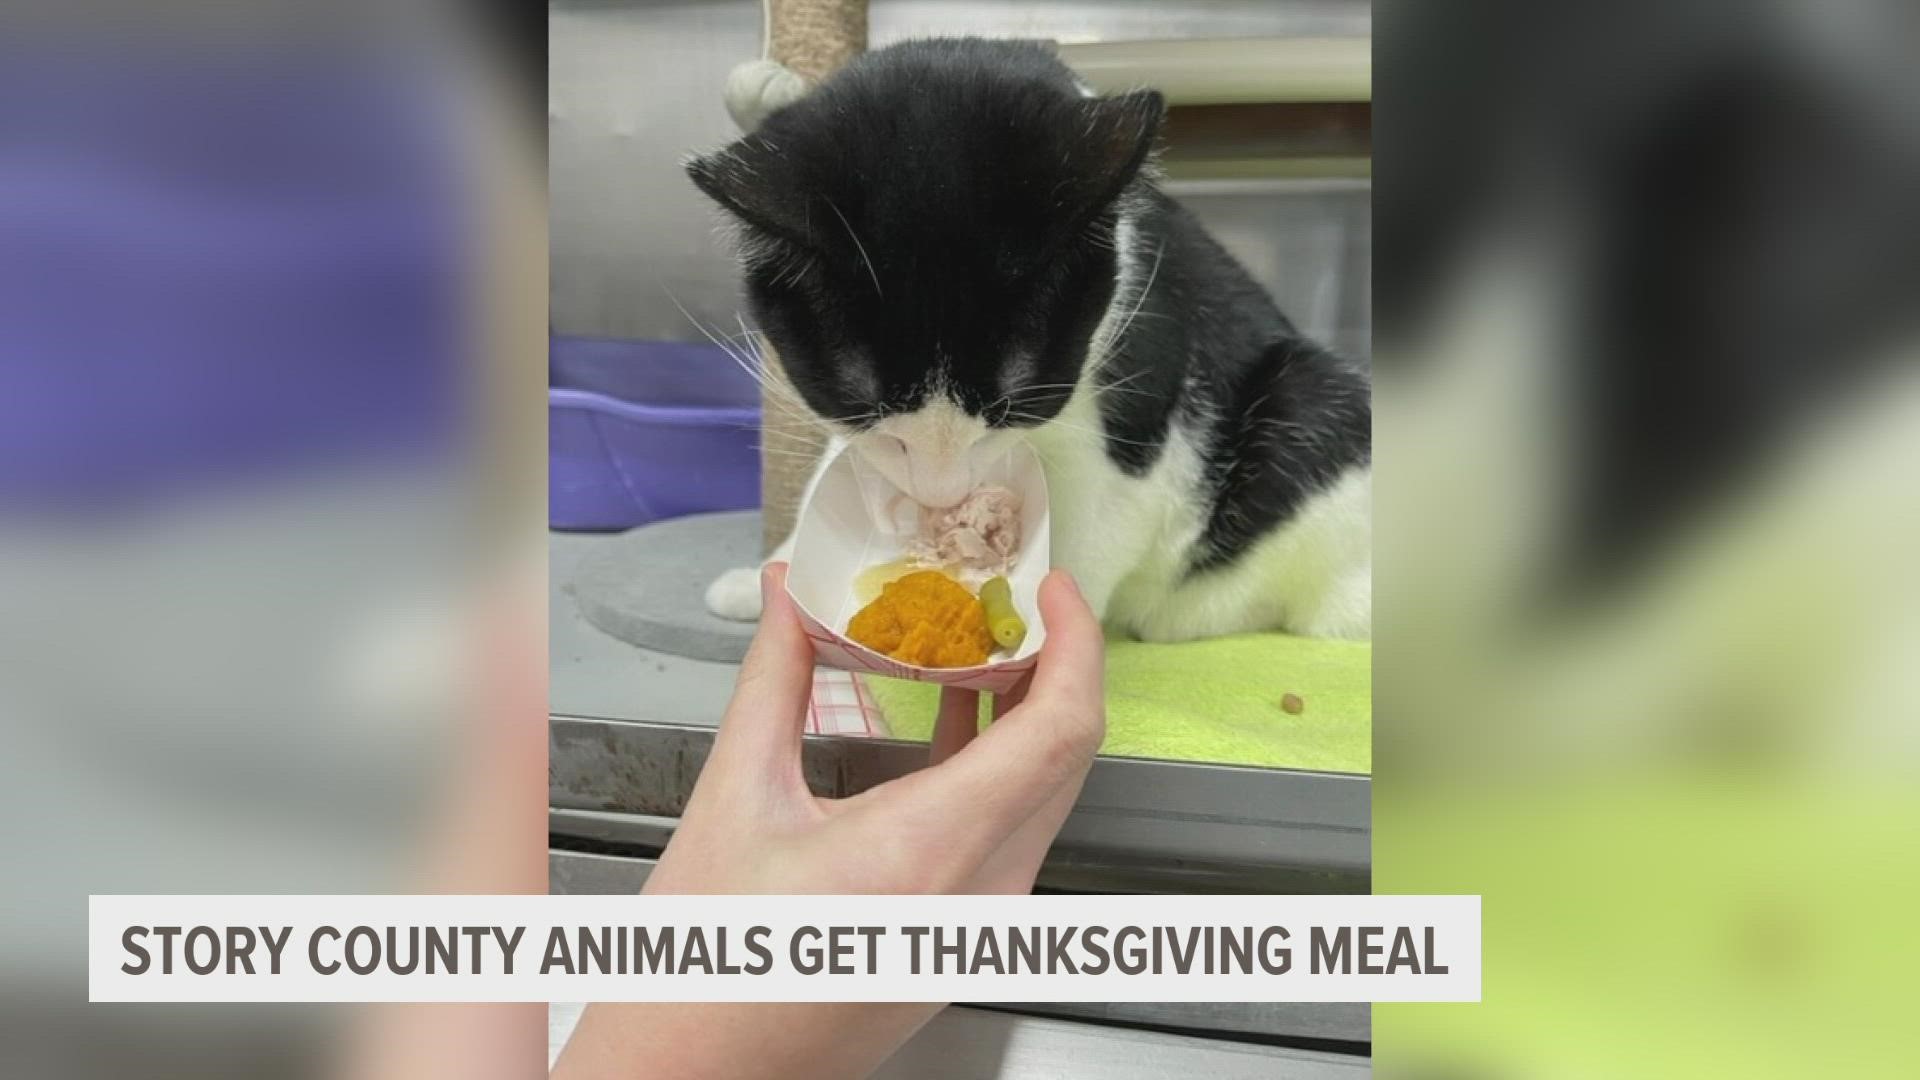 These fancy felines were served turkey, canned pumpkin, apple sauce and even a green bean.